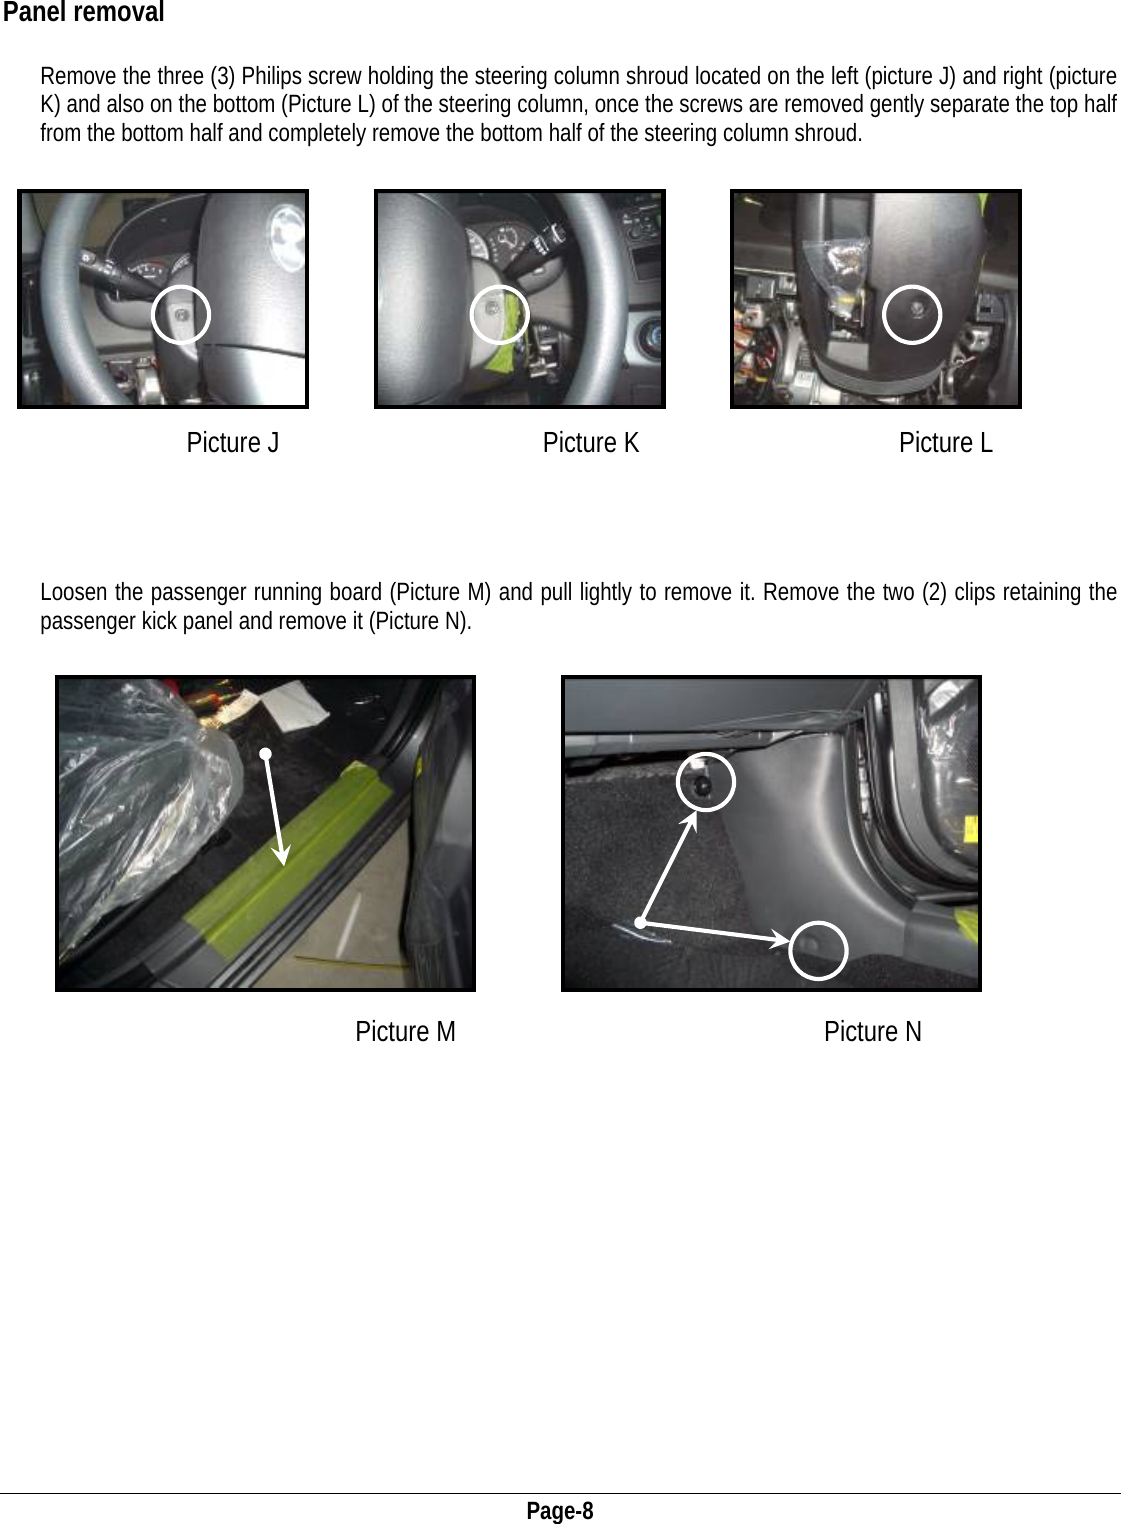  Page-8 Panel removal  Remove the three (3) Philips screw holding the steering column shroud located on the left (picture J) and right (picture K) and also on the bottom (Picture L) of the steering column, once the screws are removed gently separate the top half from the bottom half and completely remove the bottom half of the steering column shroud.           Picture J  Picture K Picture L      Loosen the passenger running board (Picture M) and pull lightly to remove it. Remove the two (2) clips retaining the passenger kick panel and remove it (Picture N).                                              Picture M Picture N 